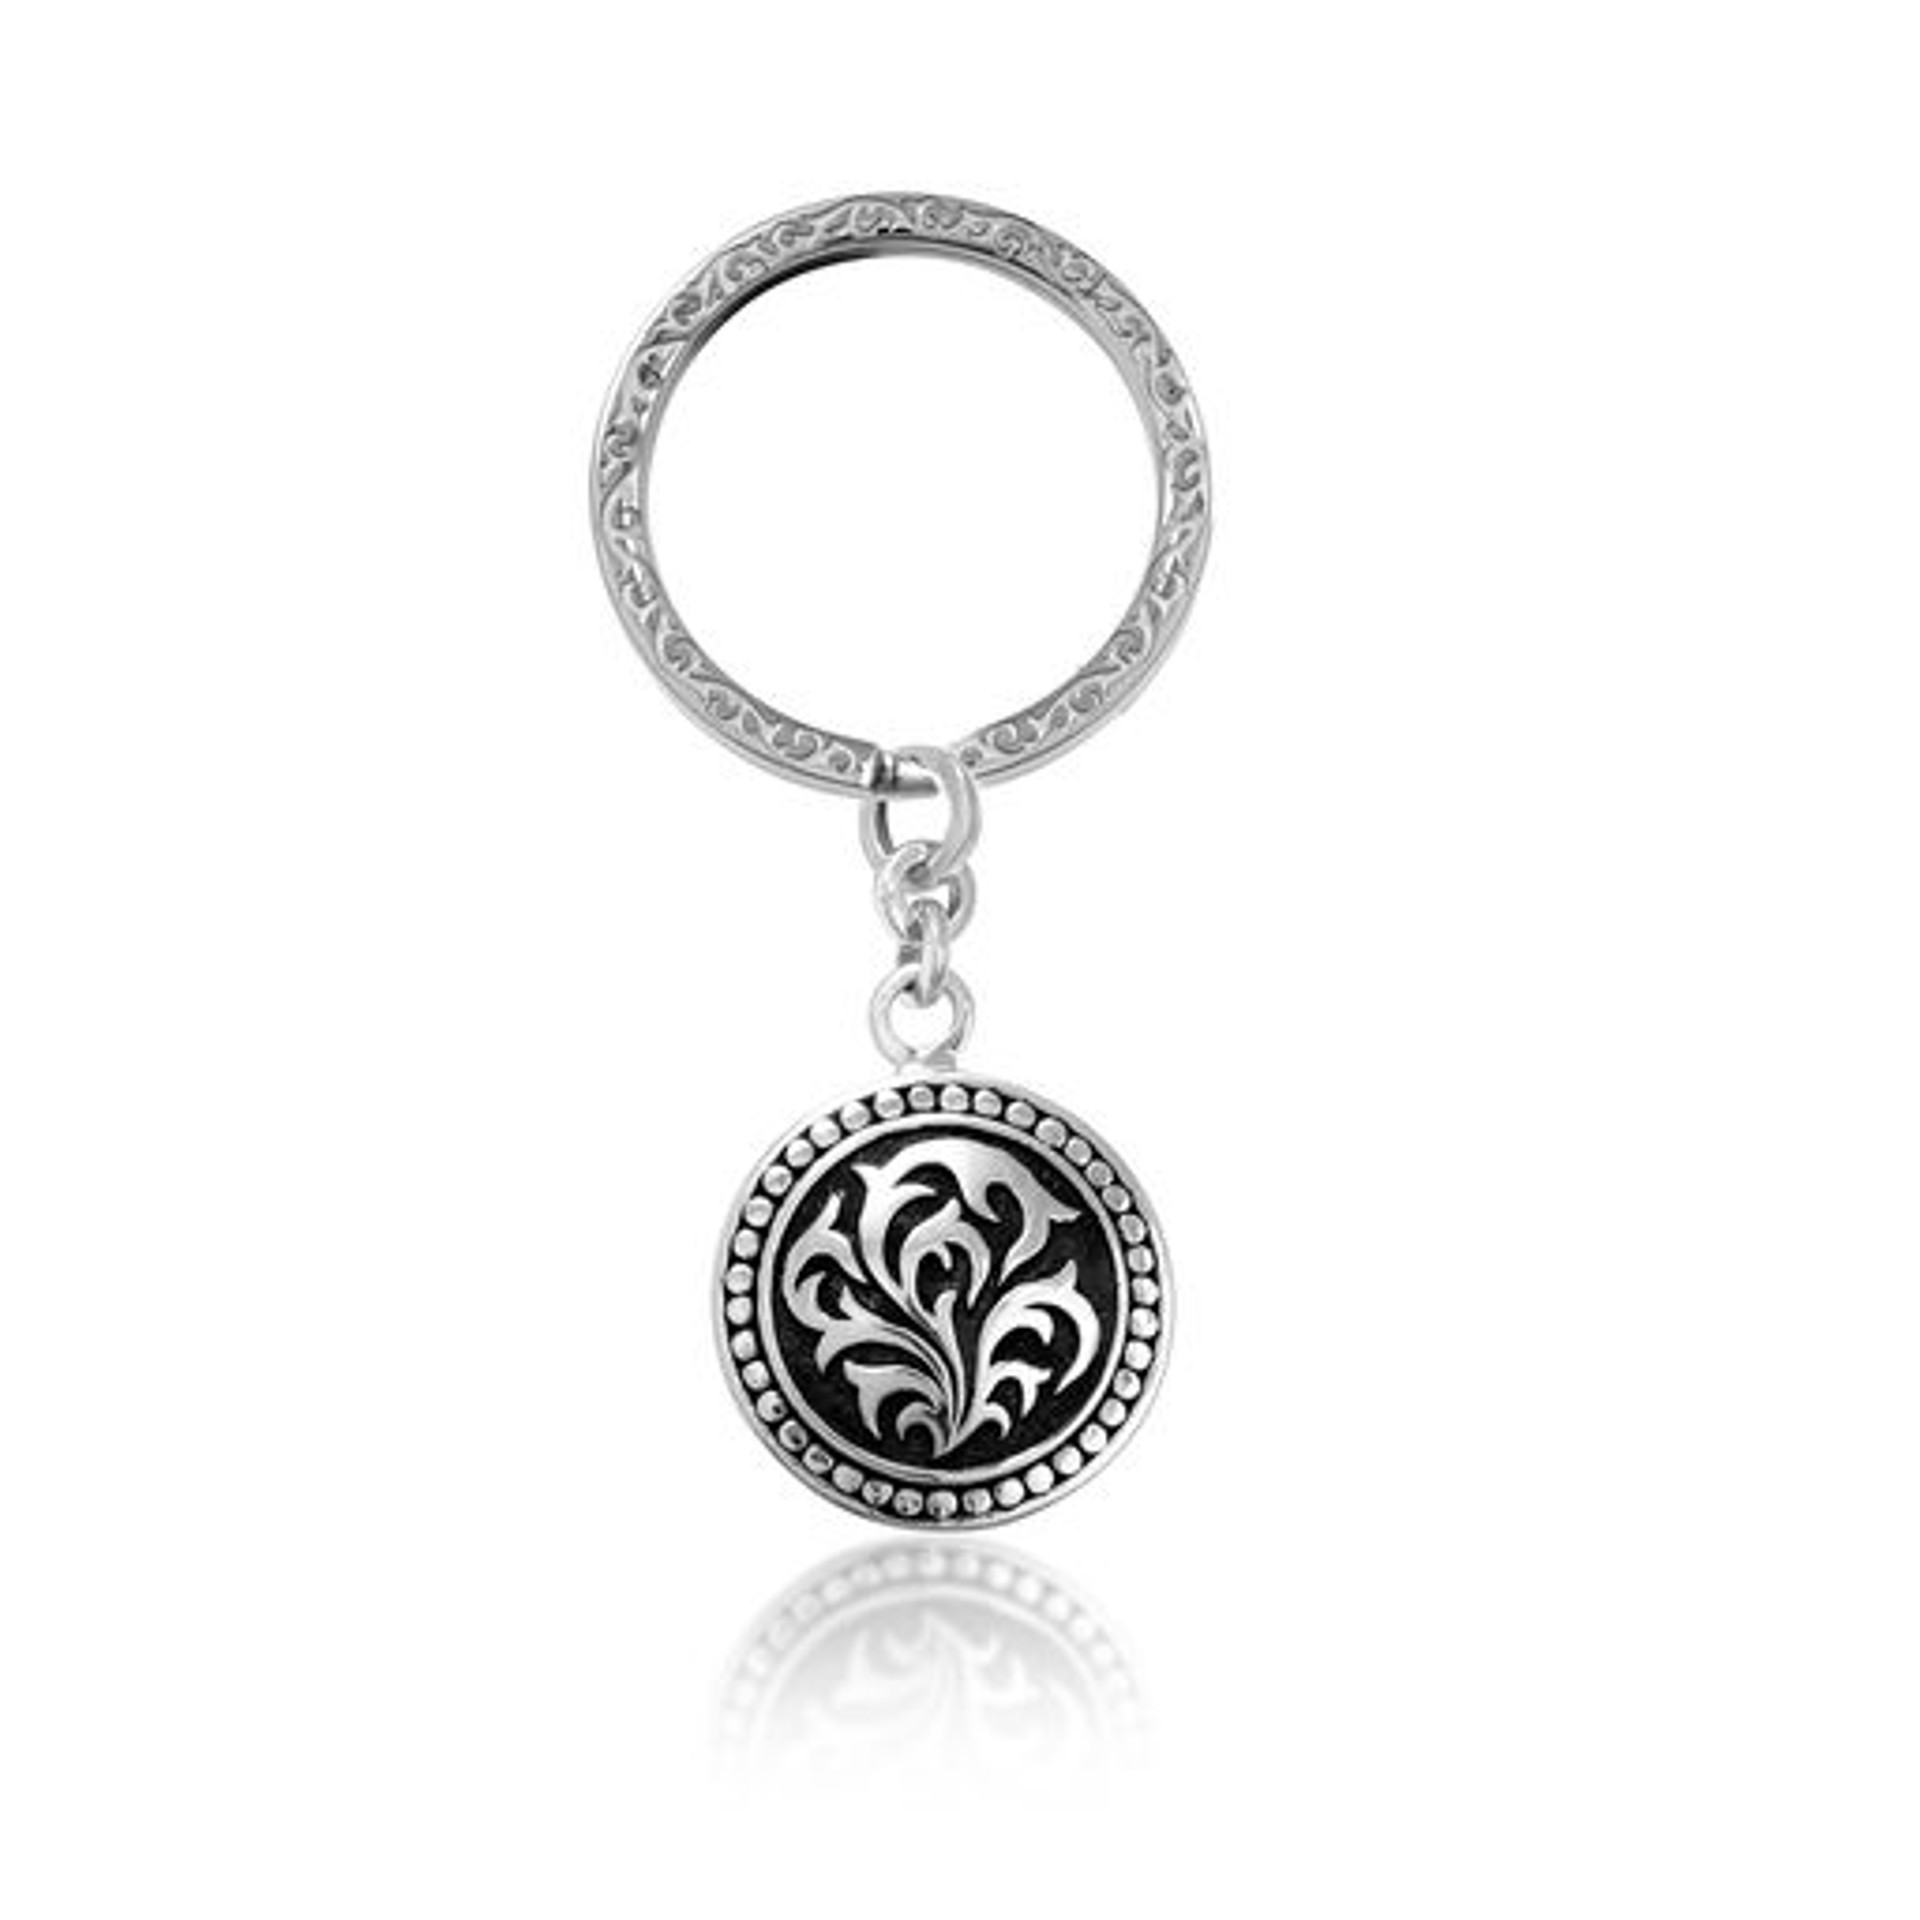 7014 Silver Keyring with Charm by Lois Hill